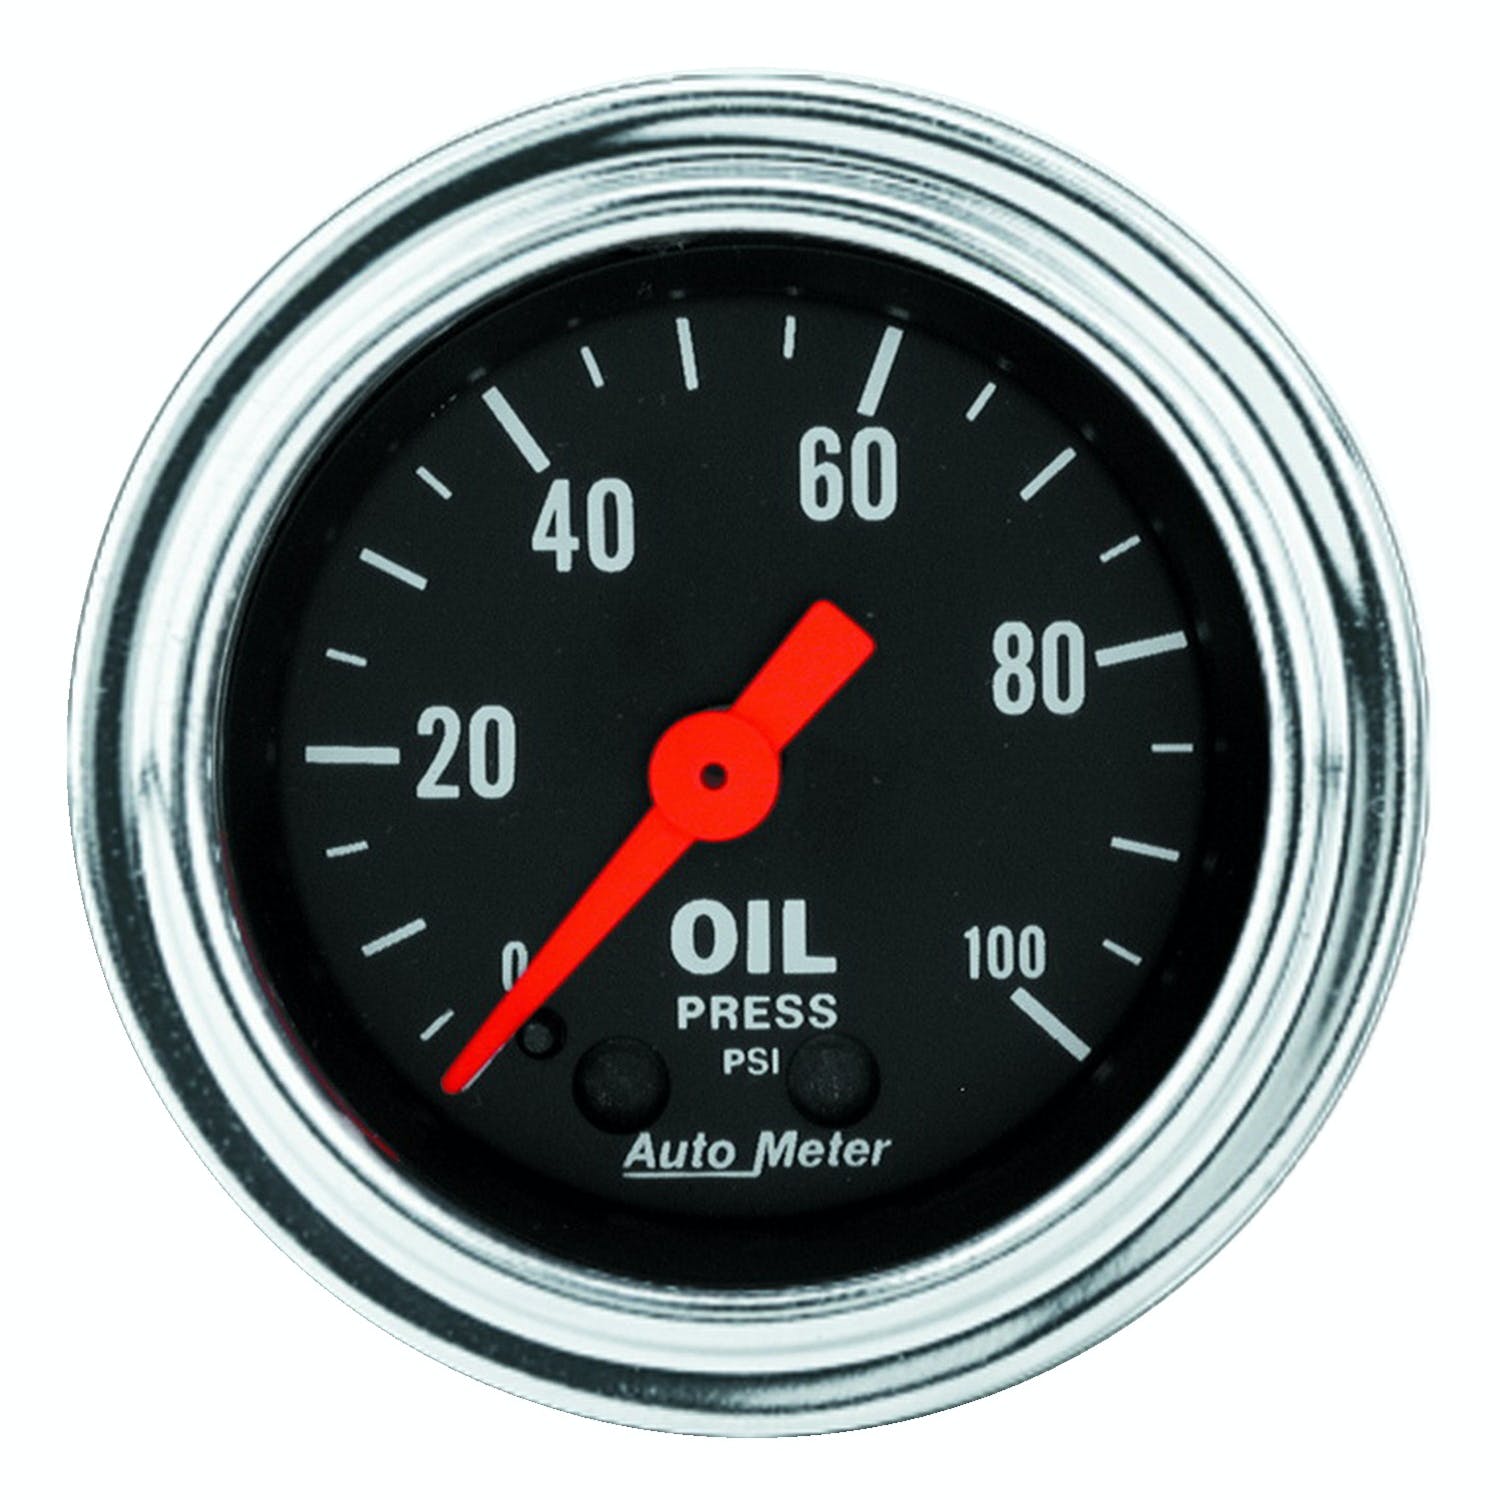 AutoMeter Products 2421 Oil Pressure Gauge 0-100 PSI